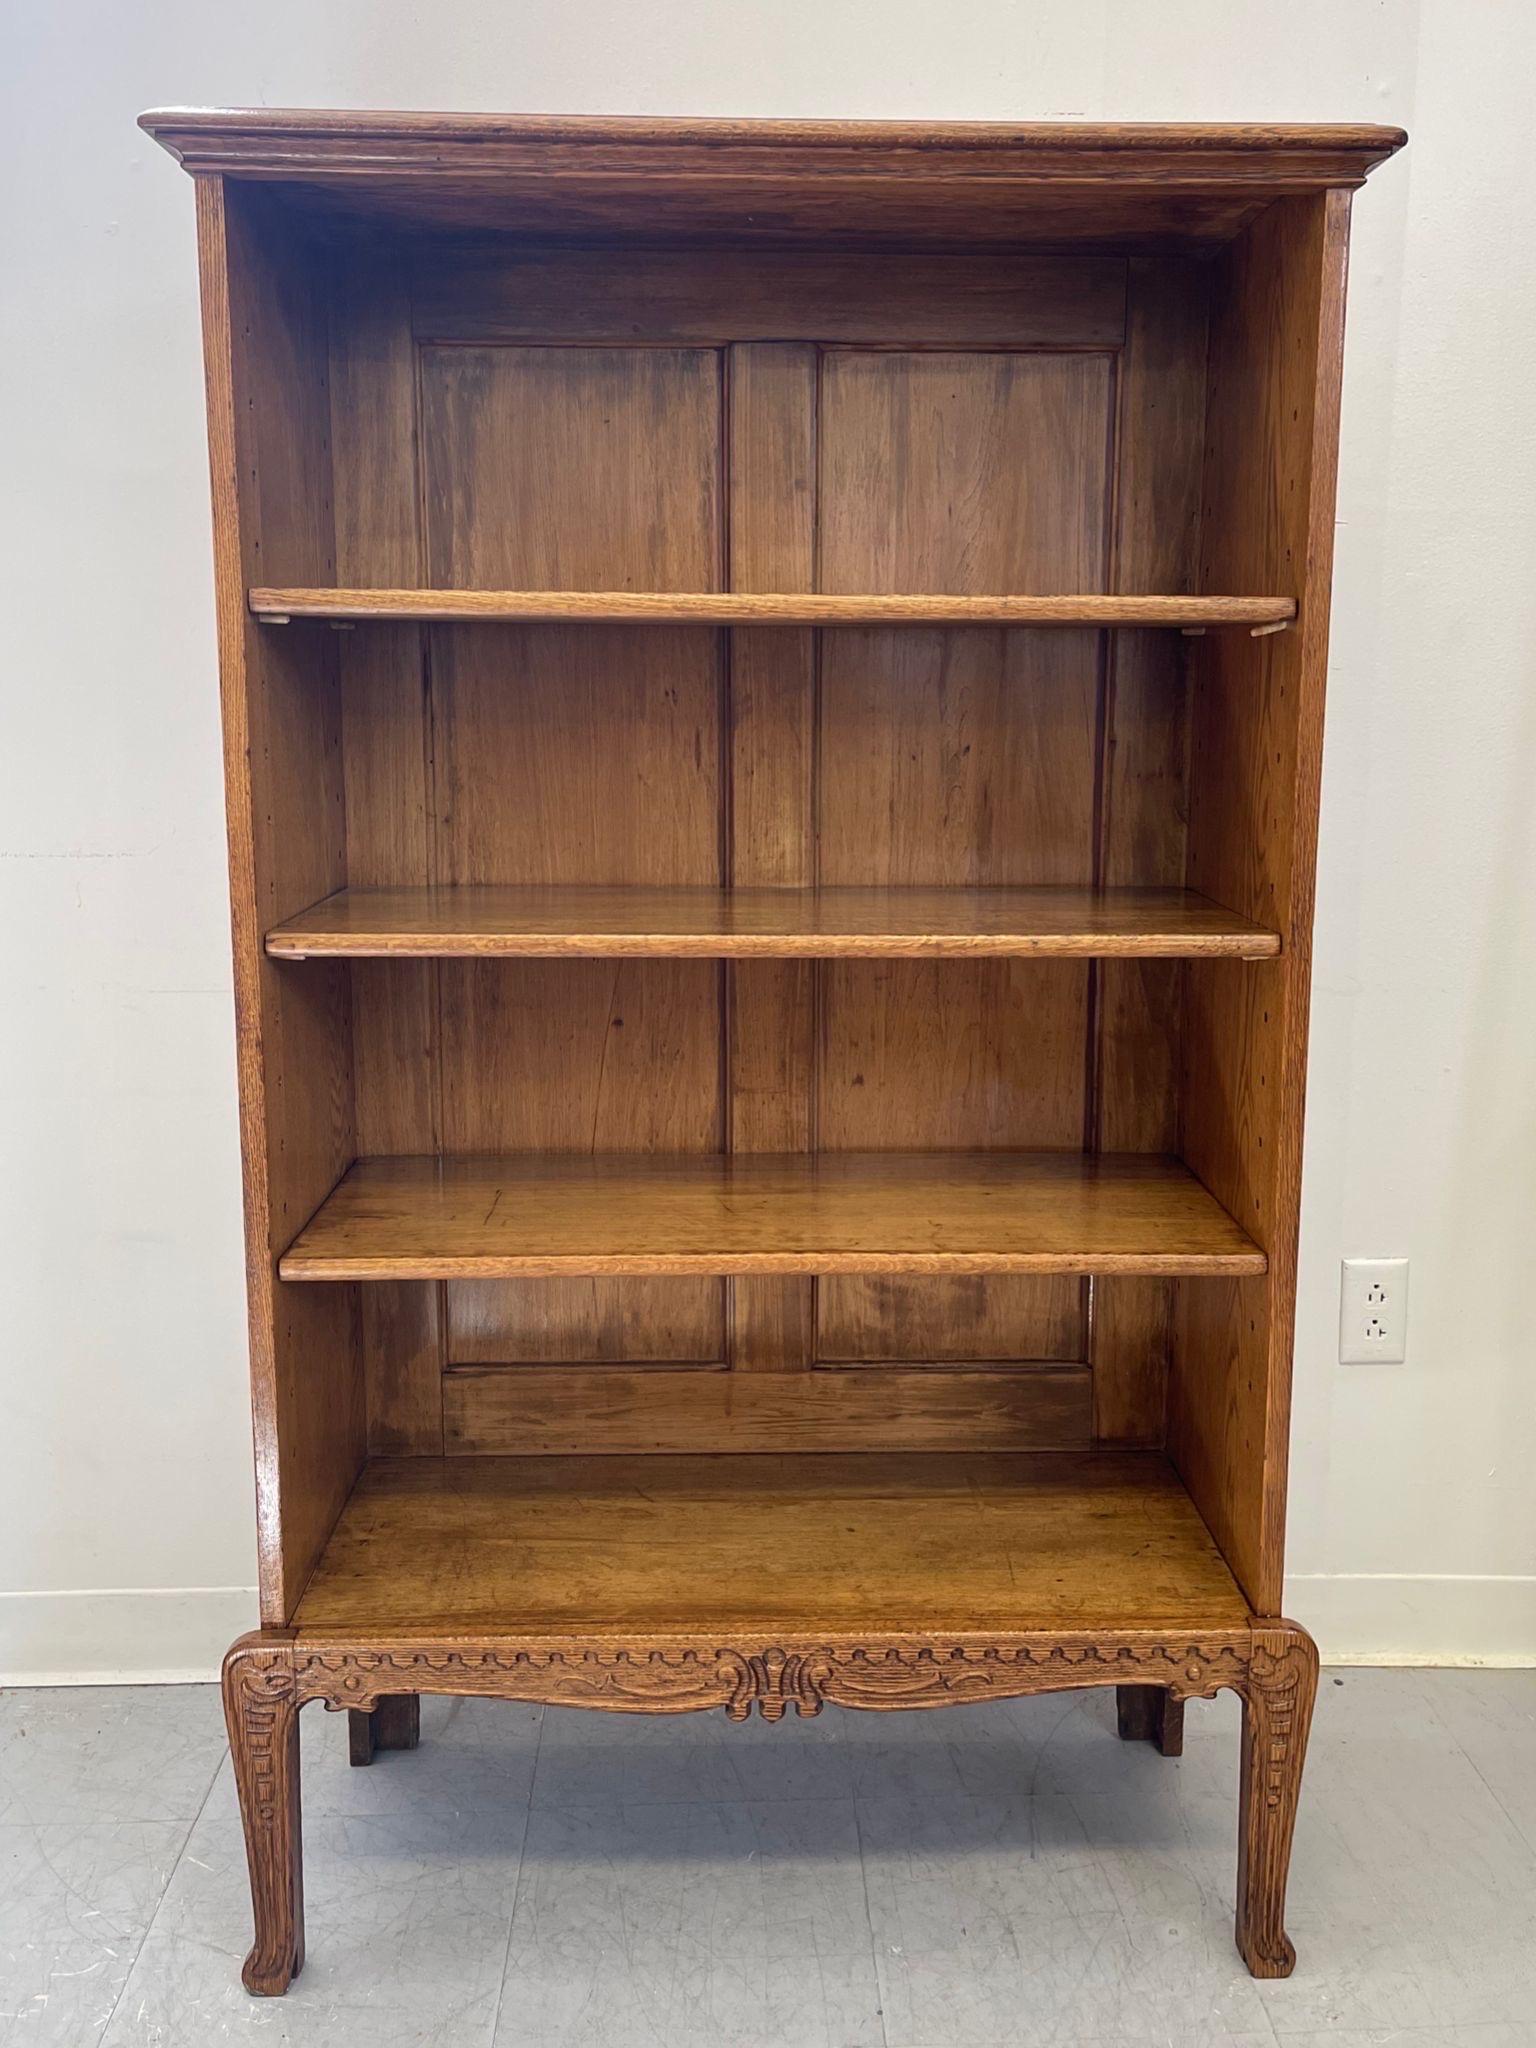 This Bookshelf has adjustable shelving and a carved wood base. Antique style. Beautiful Patina to the wood. Vintage condition consistent with age as Pictured.

Dimensions. 32 W ; 13 D ; 57 H